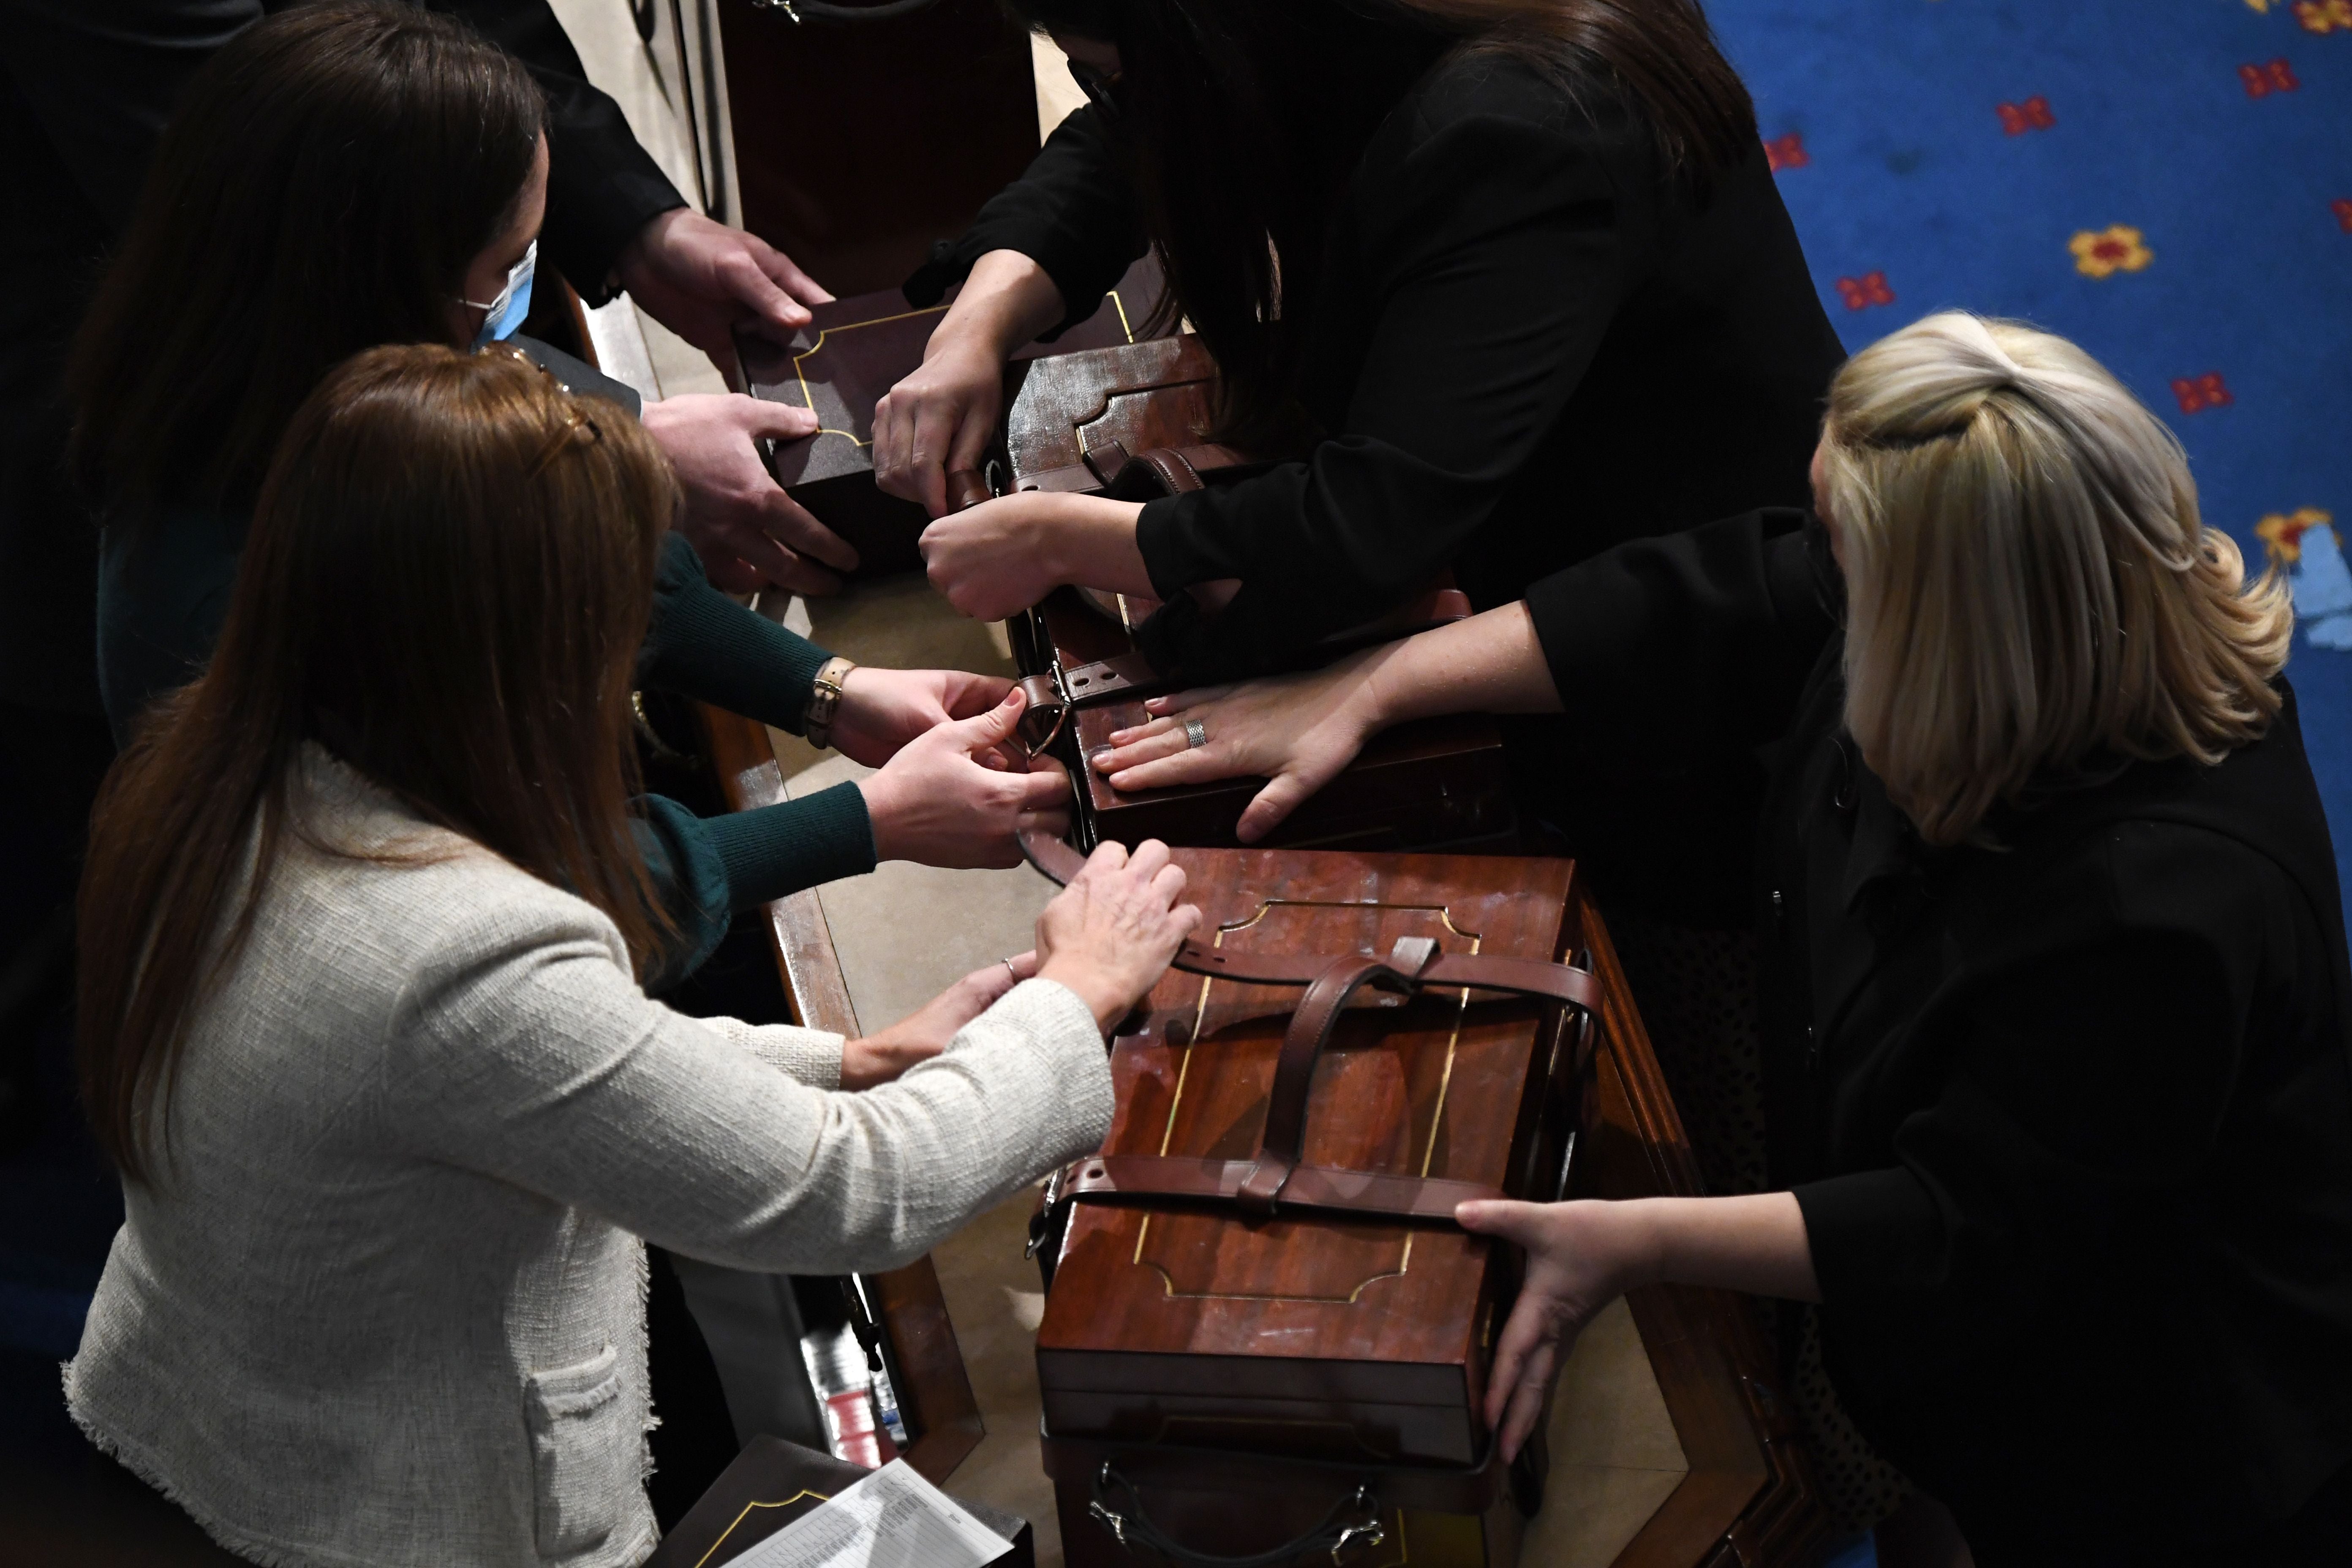 Cases containing electoral votes are opened during a joint session of Congress after the session resumed following protests at the US Capitol in Washington, DC, early on 7 January 2021